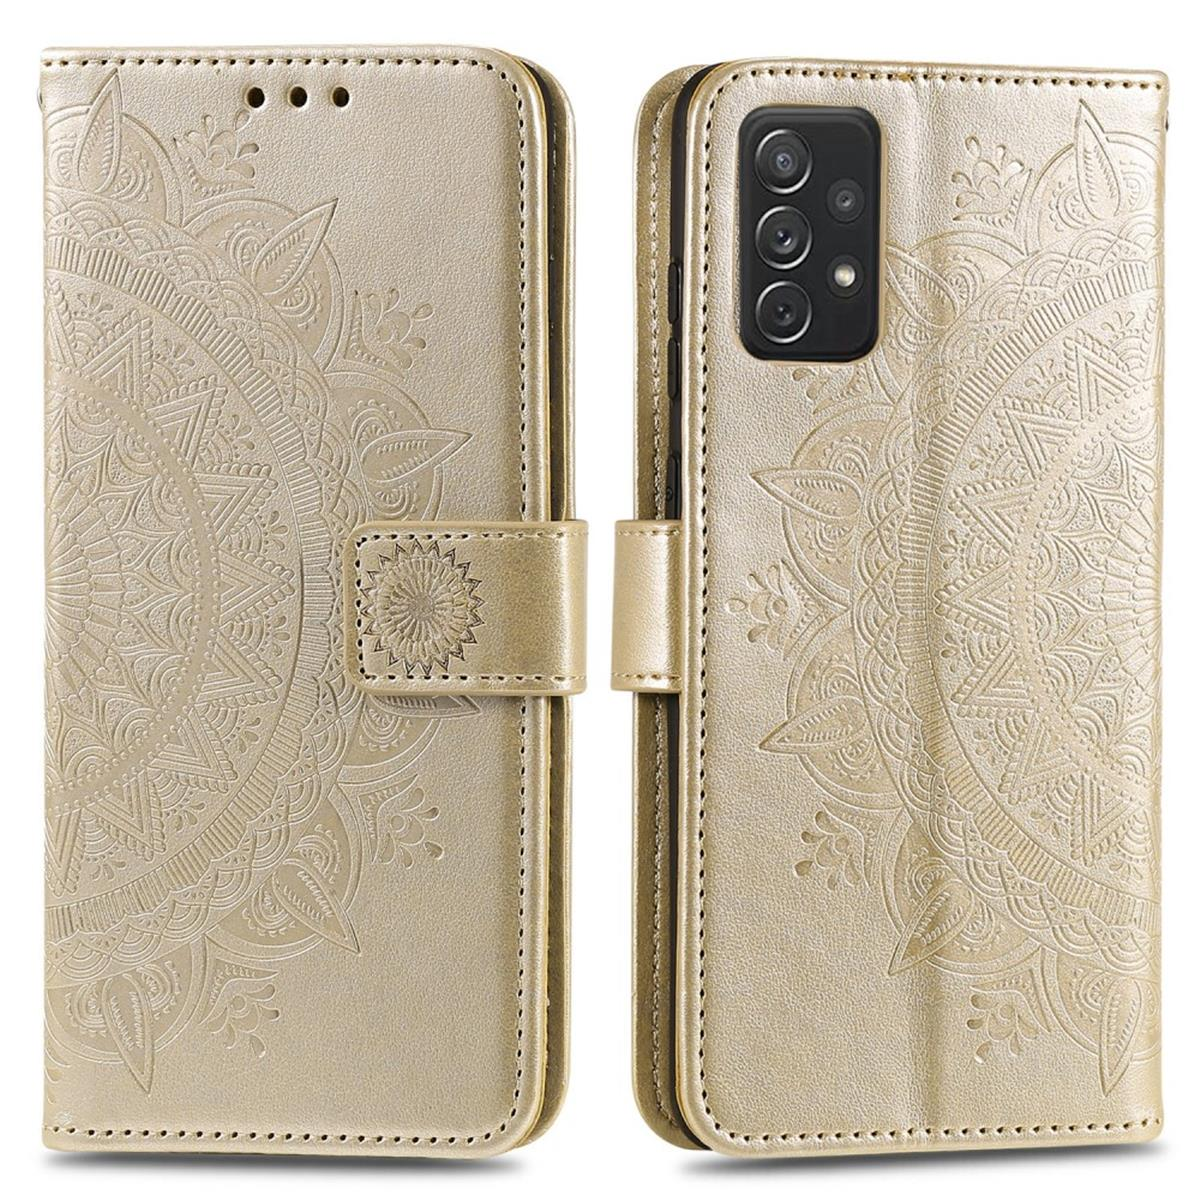 COVERKINGZ Klapphülle 5G, 5G/A52s Muster, mit Bookcover, A52/A52 Galaxy Gold Samsung, Mandala